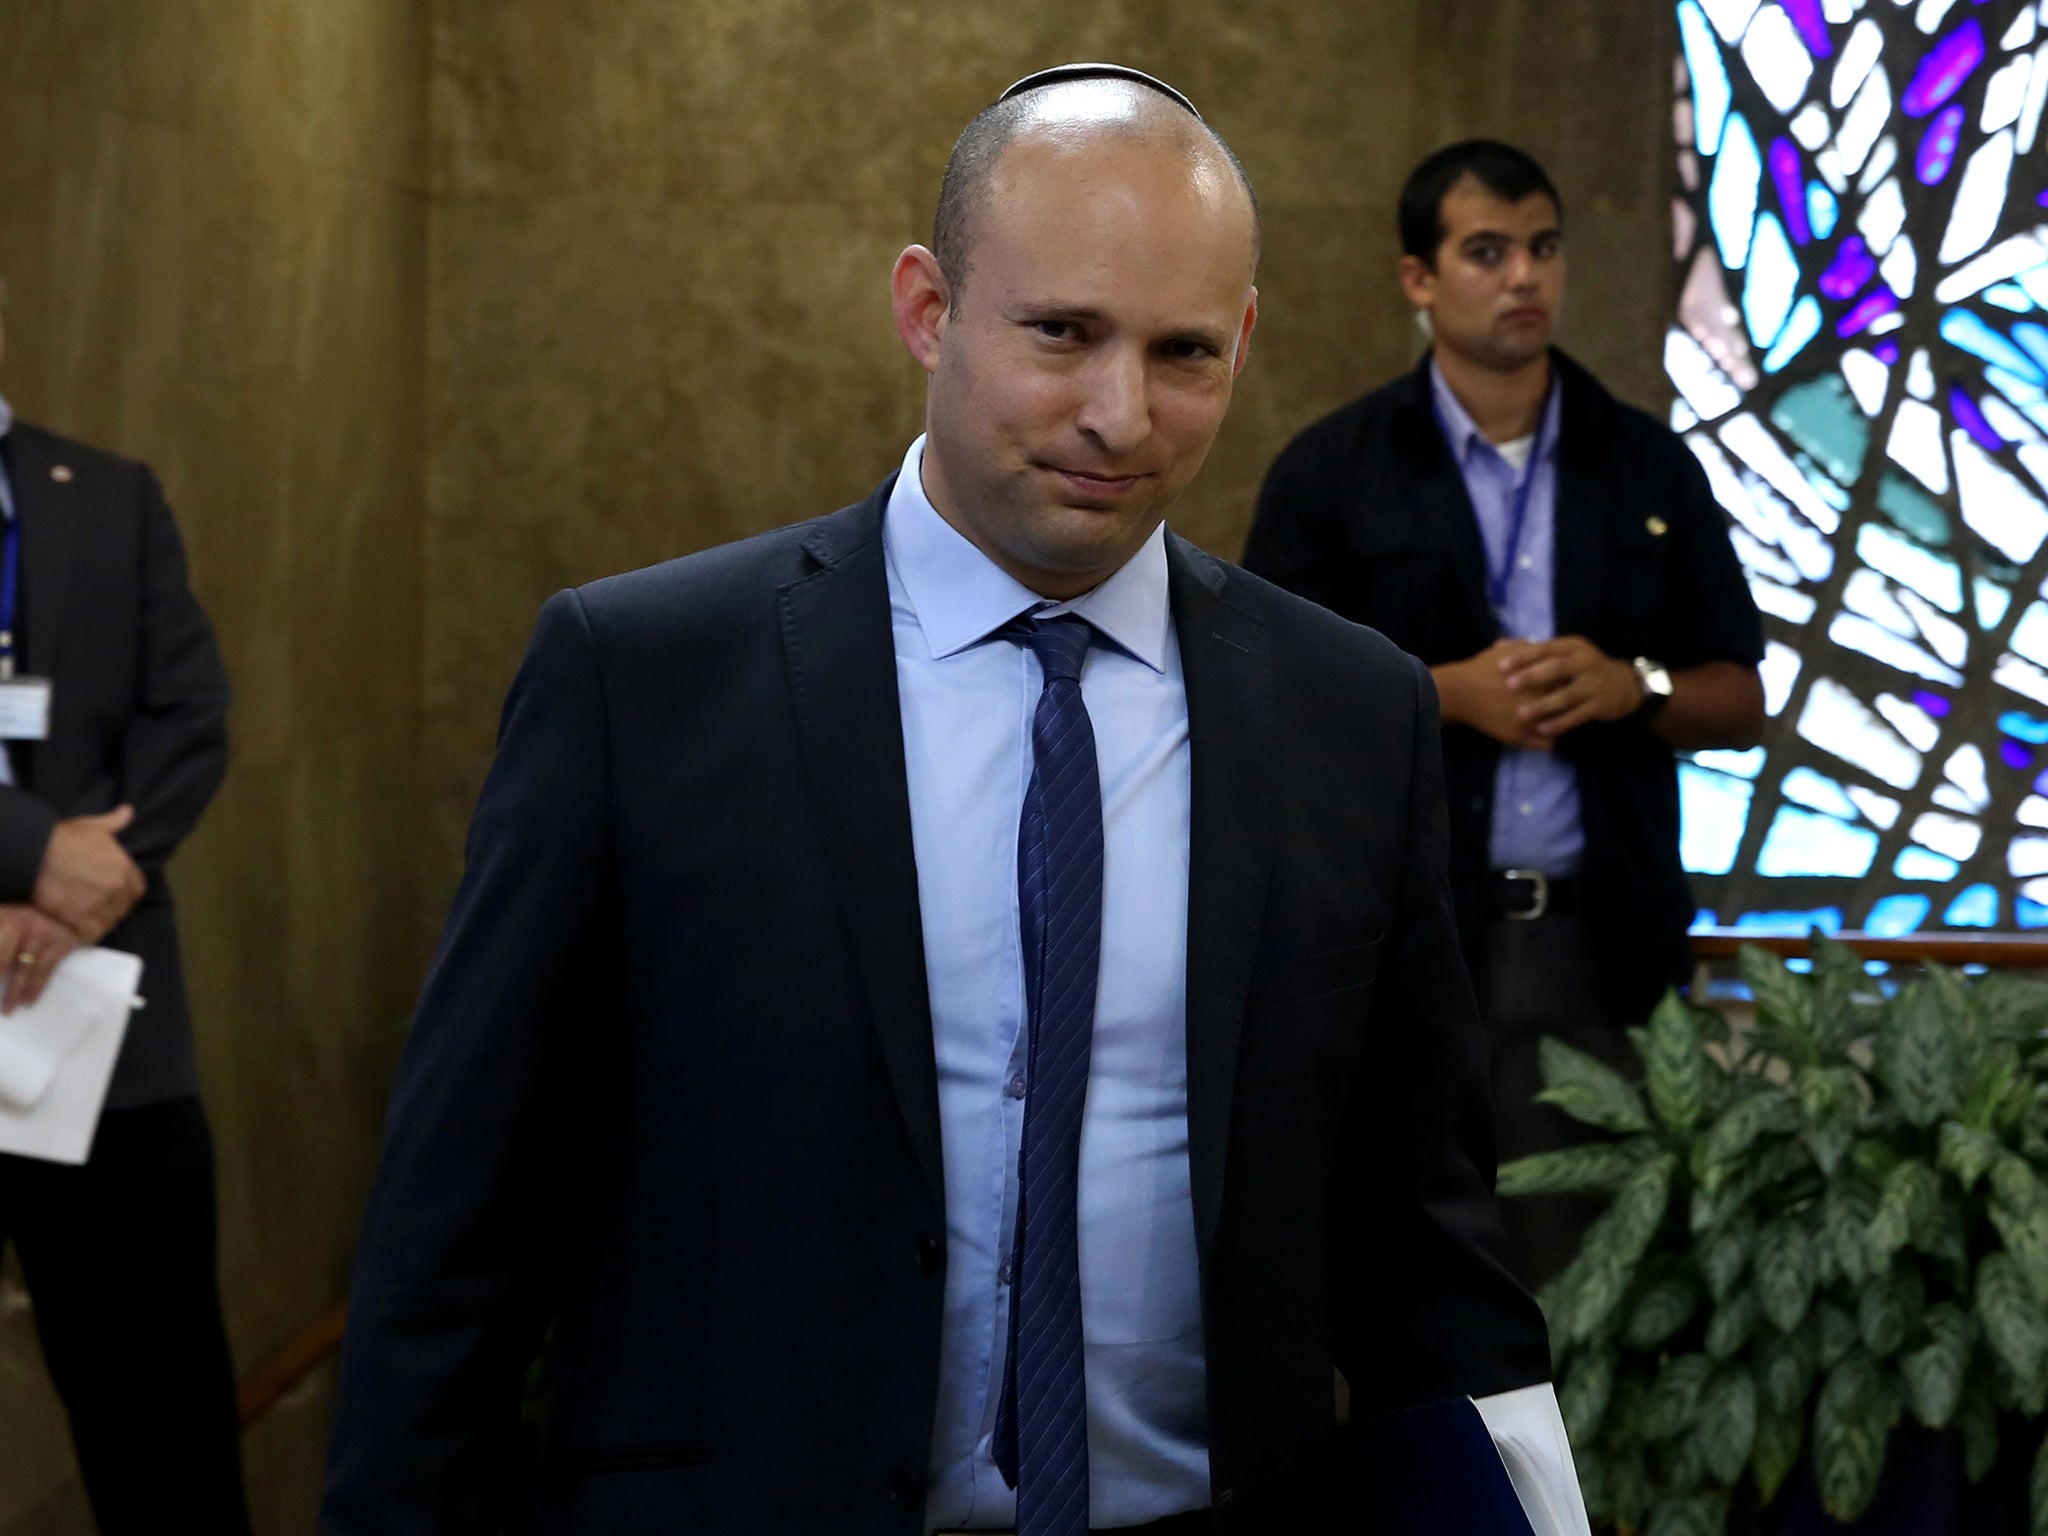 Israeli minister Naftali Bennett says the country must defy any denouncement by the UN Security Council